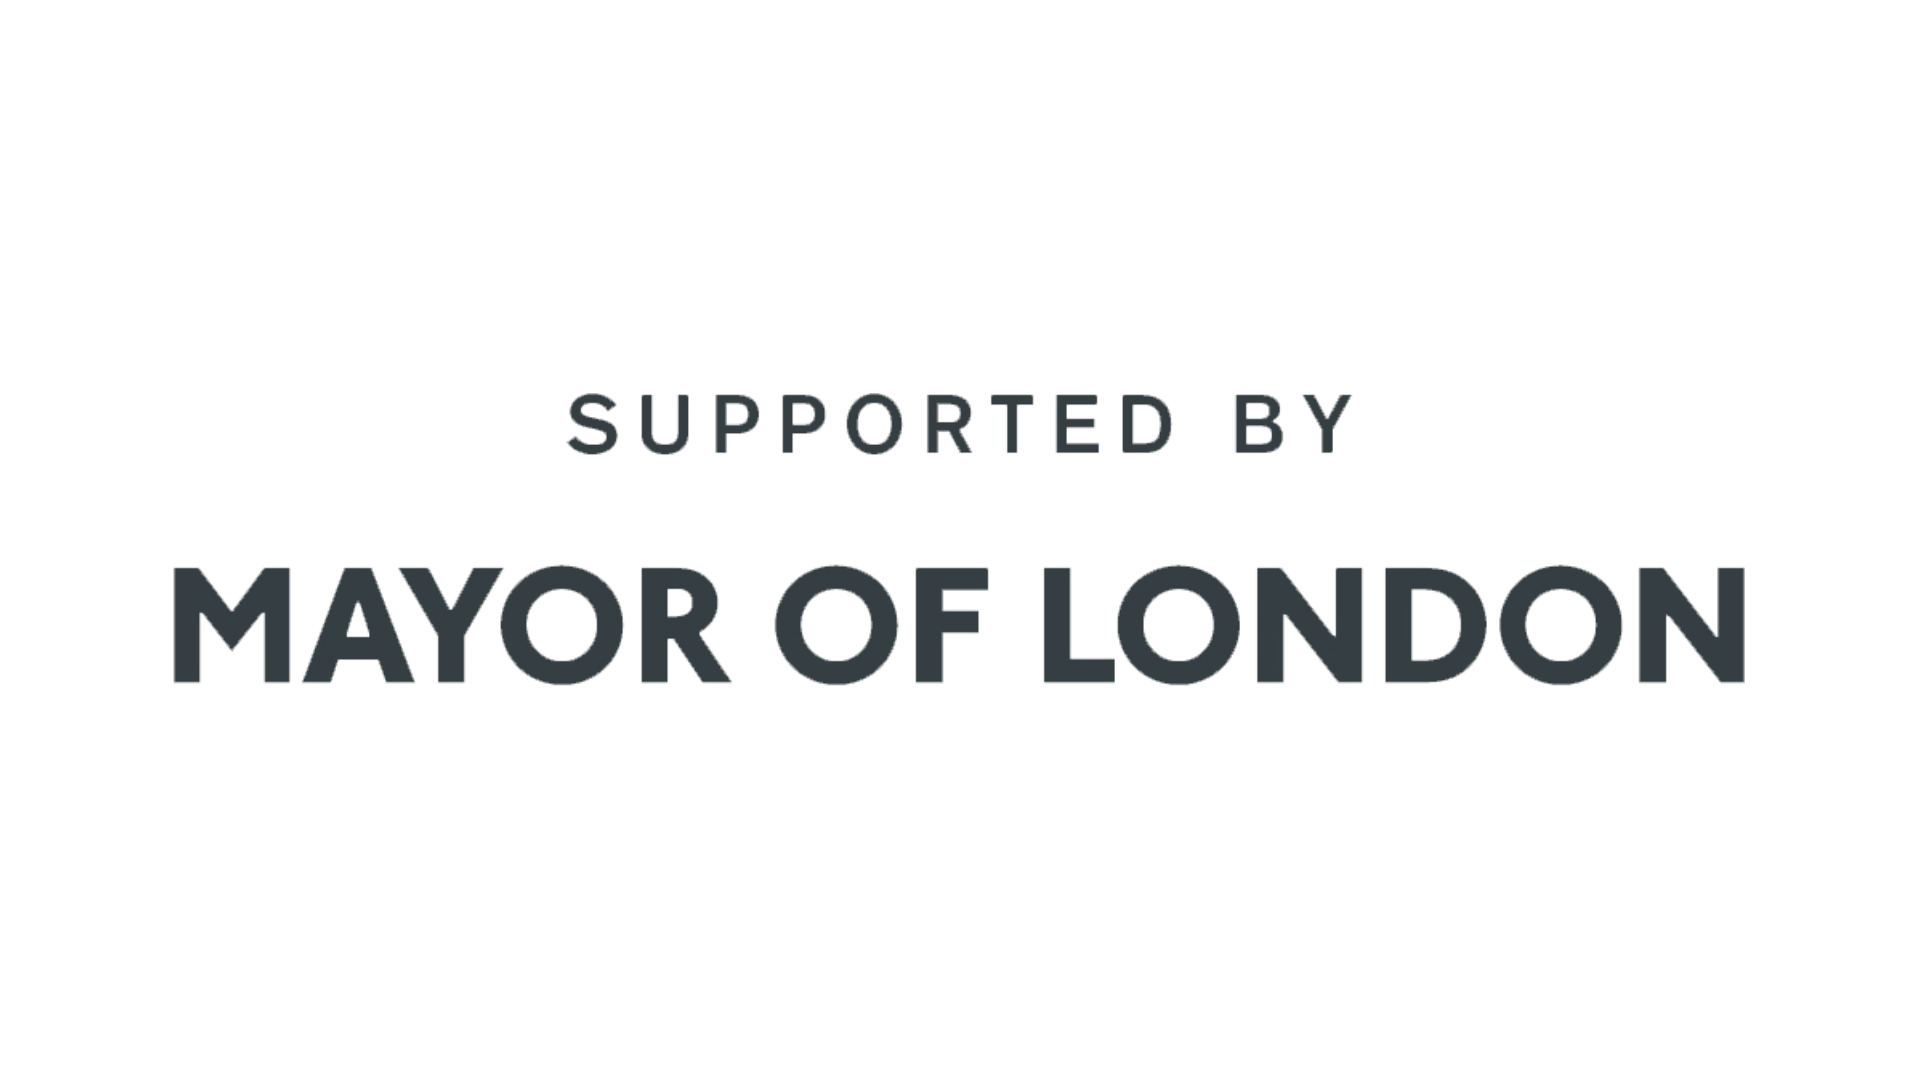 Supported by Mayor of London